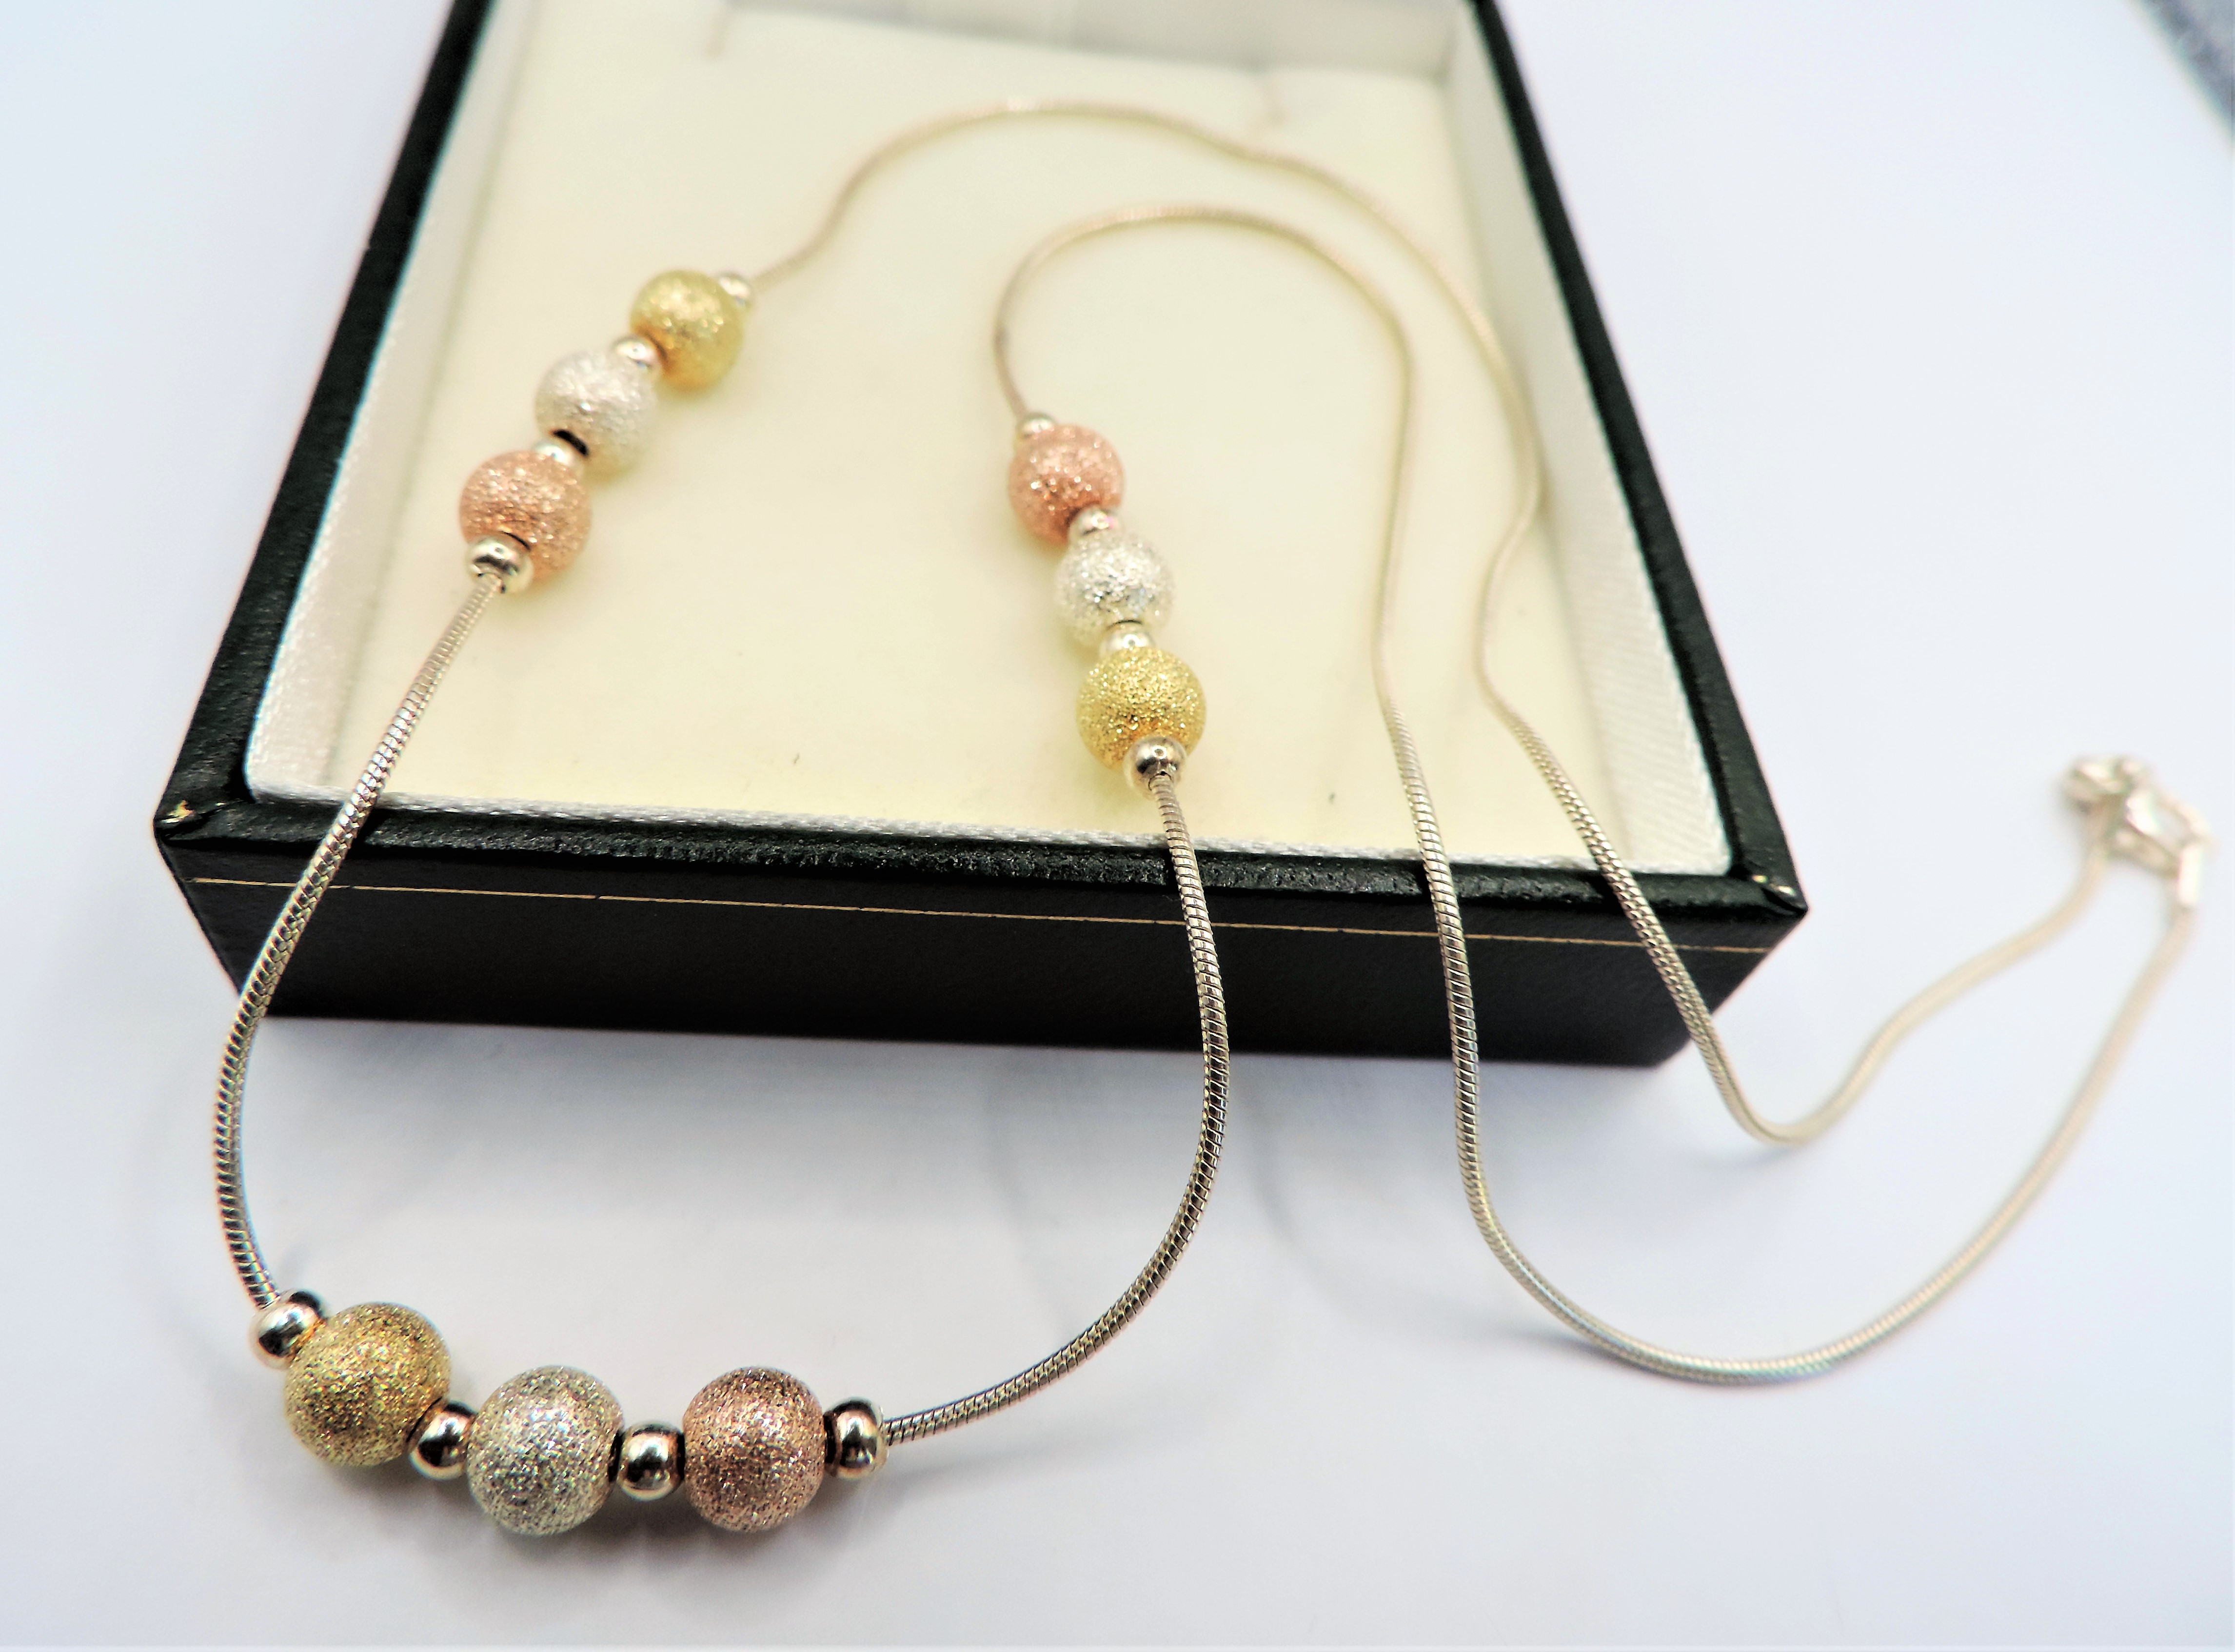 Italian Bi-Colour Gold on Sterling Silver Ball Bead Necklace - Image 2 of 3